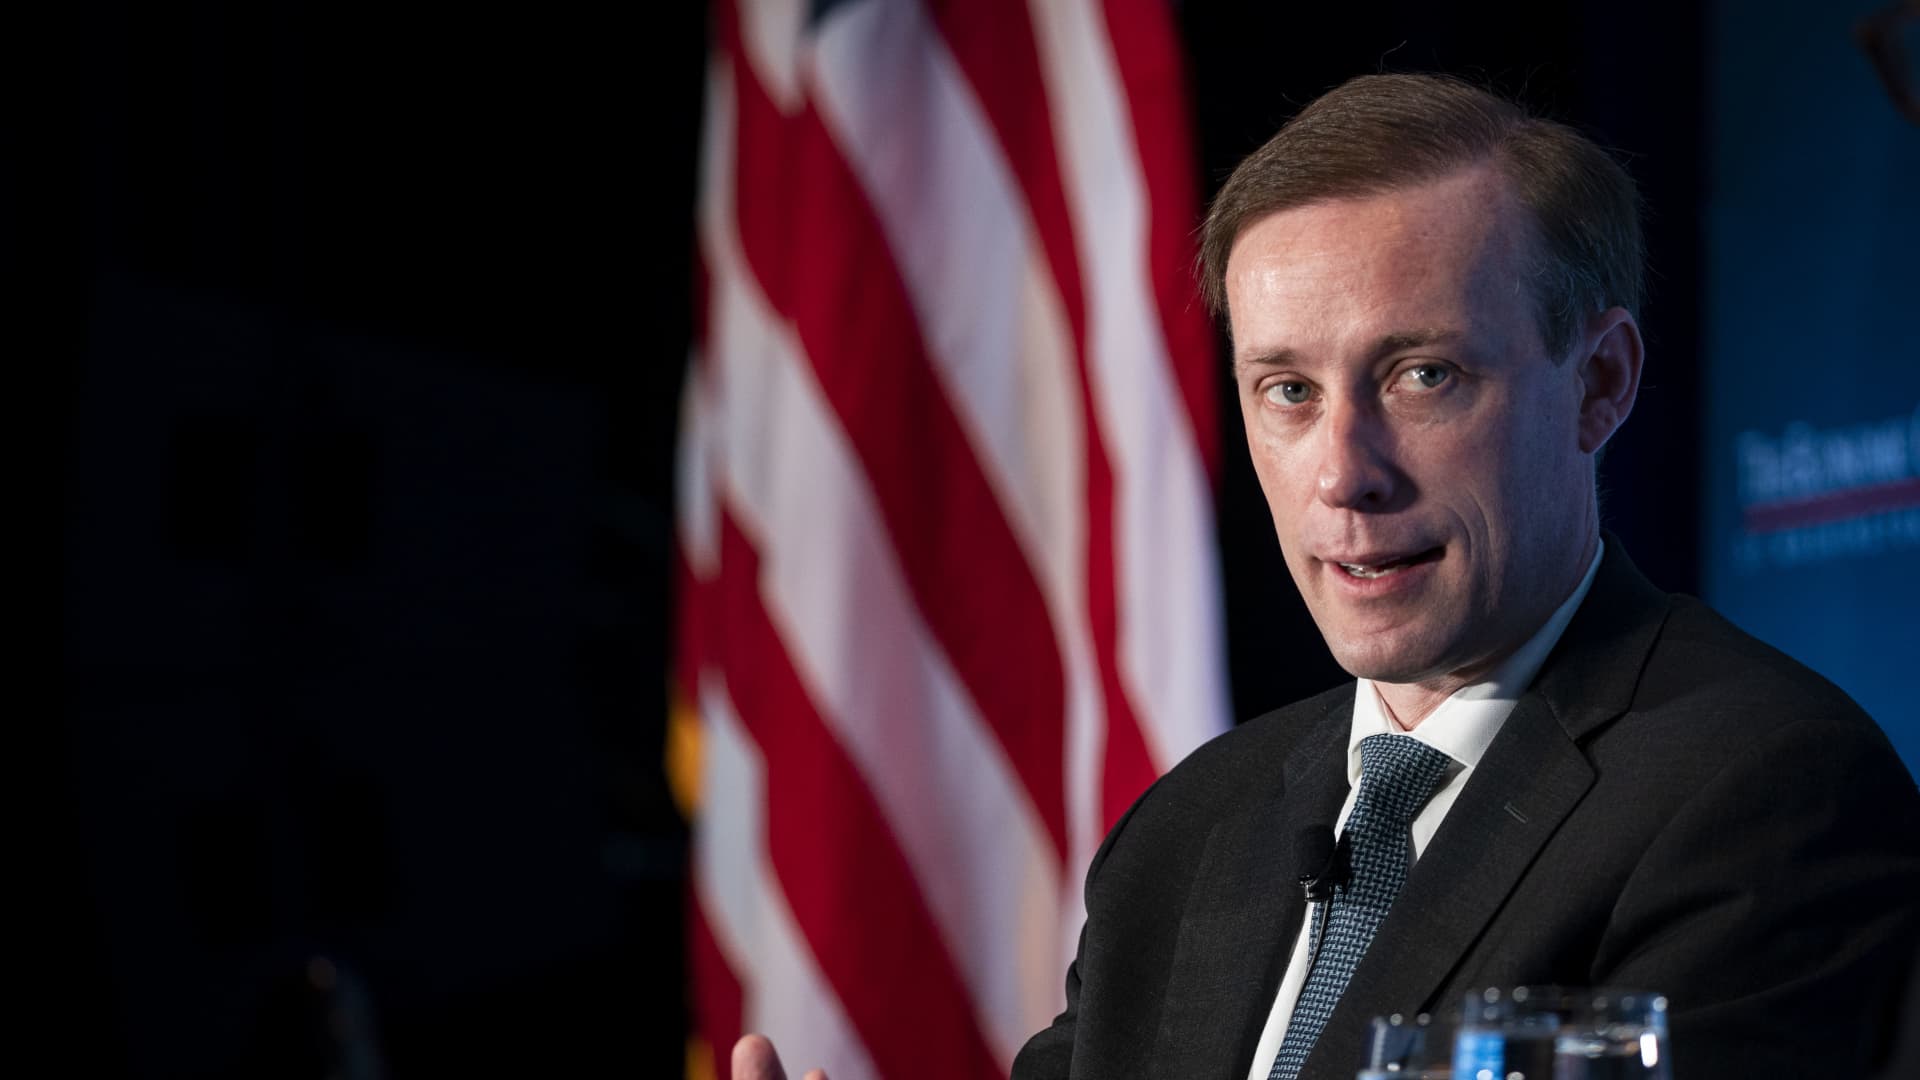 Jake Sullivan, White House national security adviser, speaks during an interview at an Economic Club of Washington event in Washington, D.C., U.S., on Thursday, April 14, 2022.